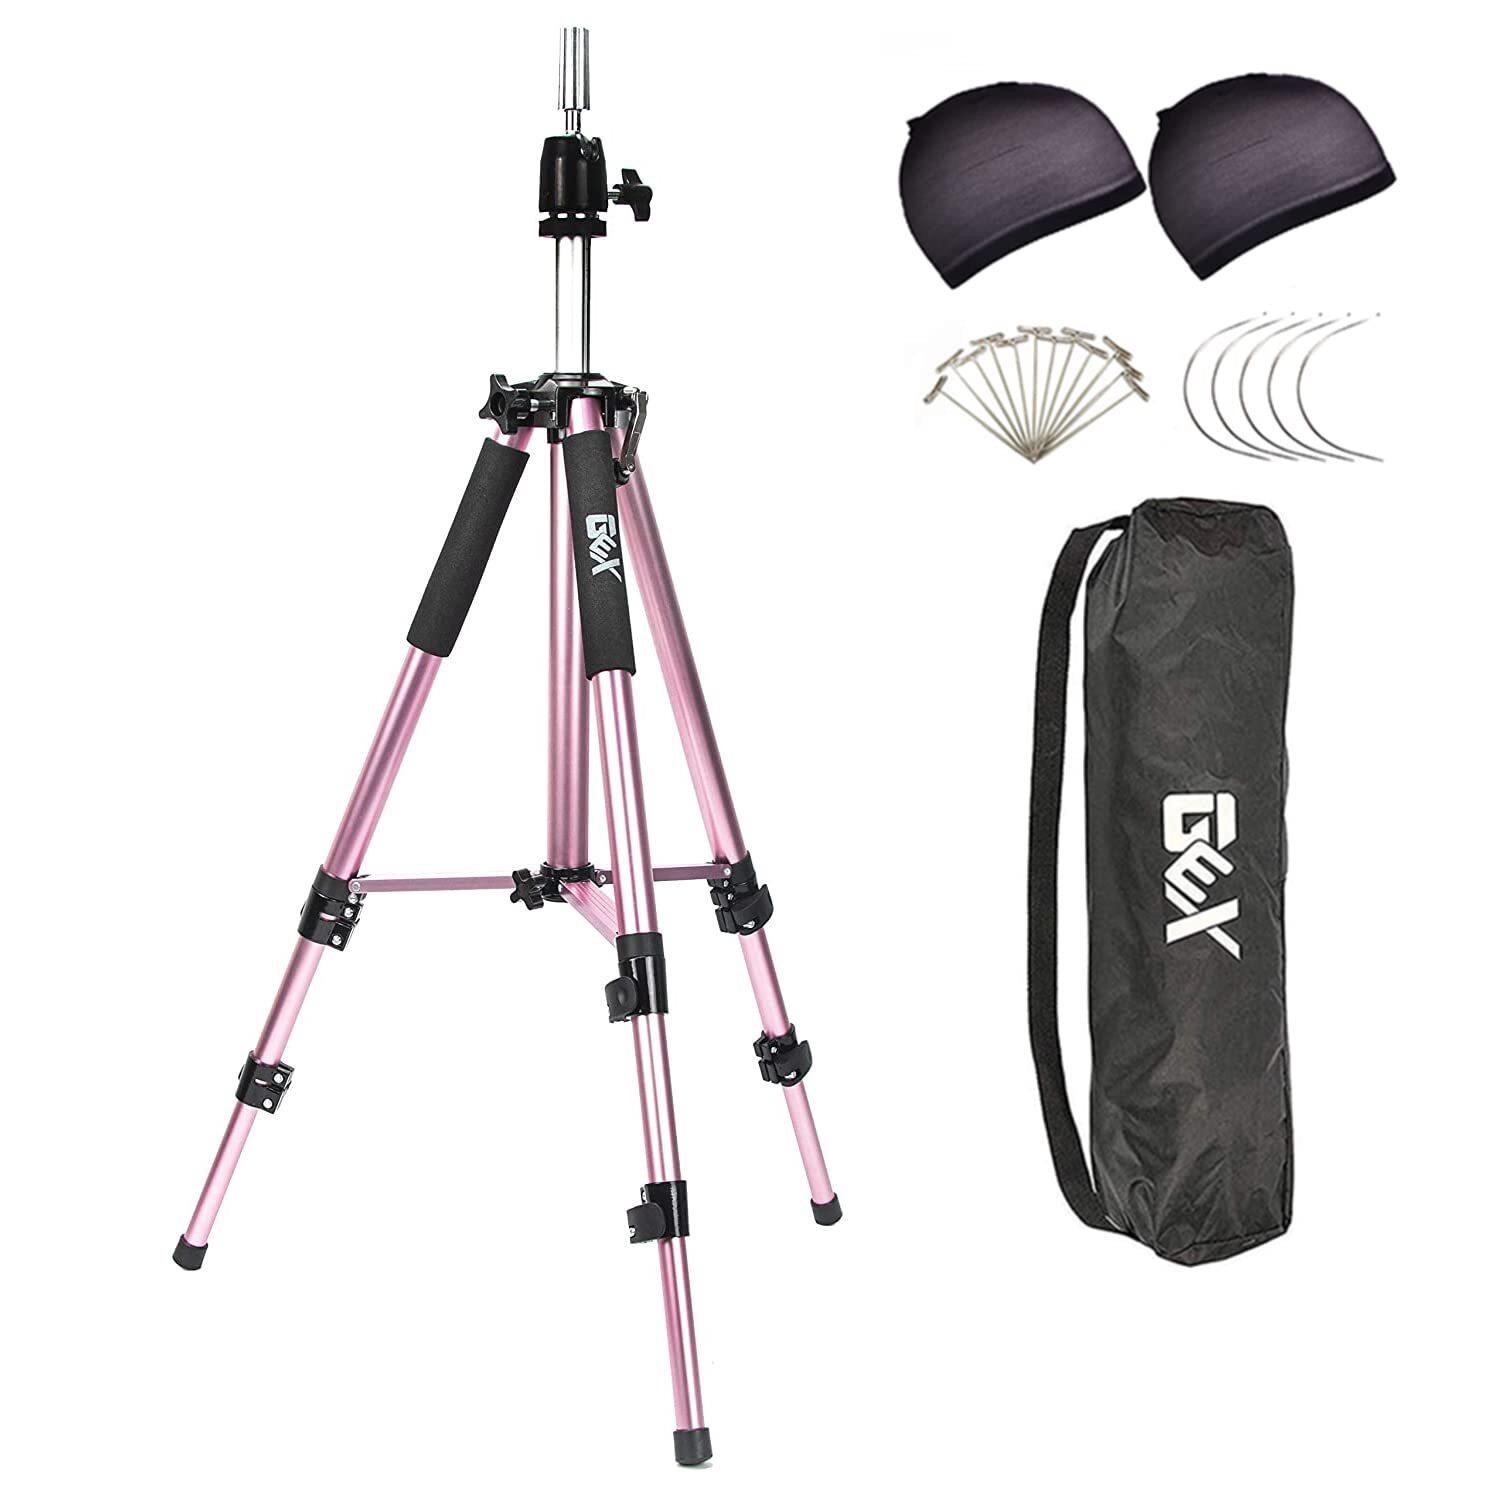 GEX 63inch Mannequin Tripod - Rose Gold